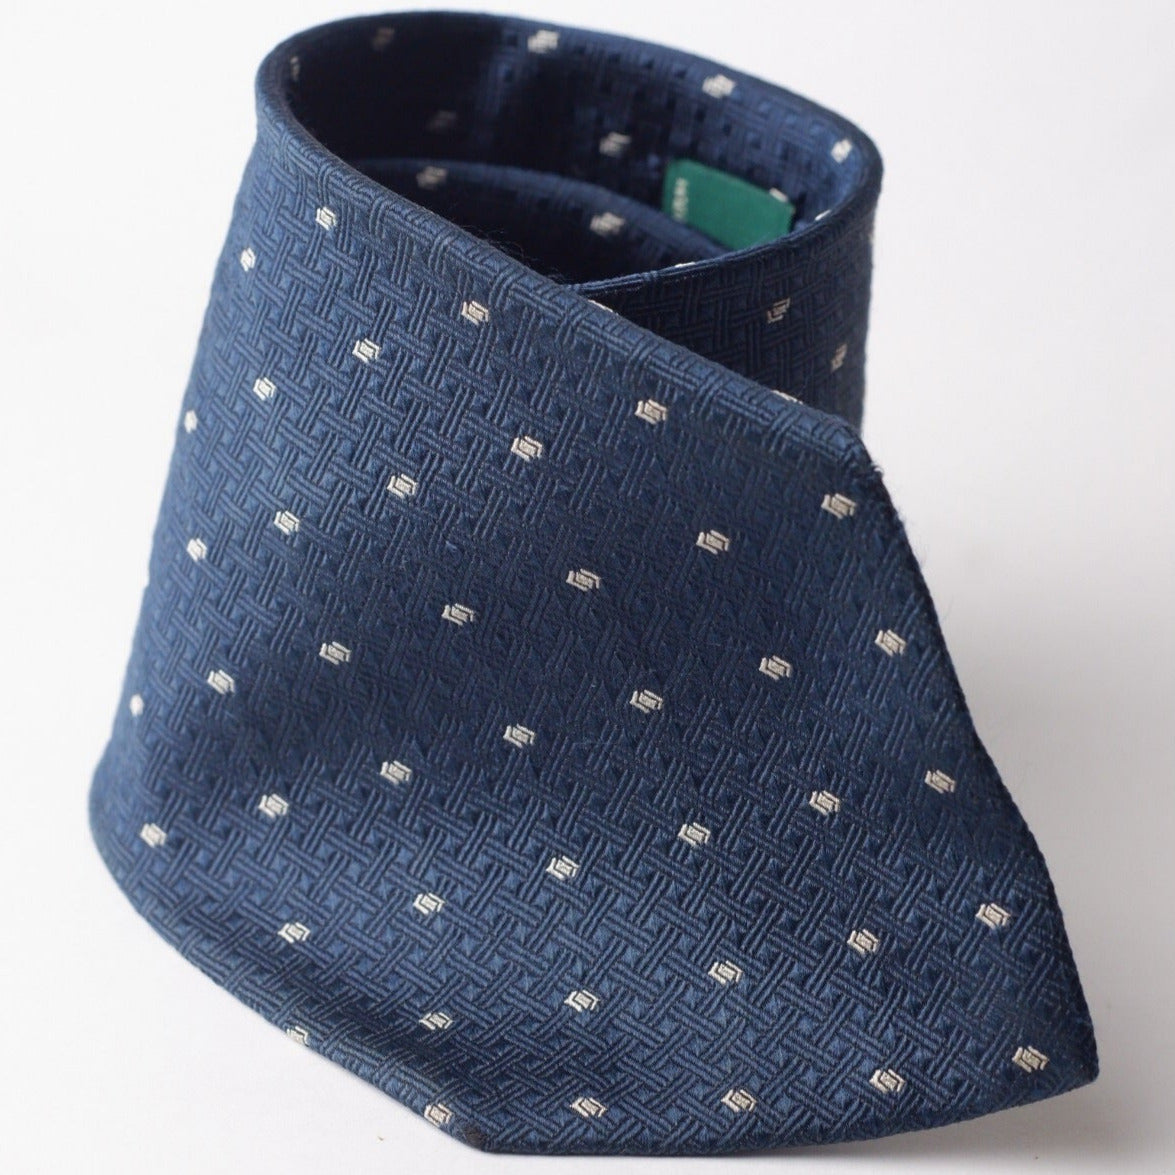 Andrew's Ties Navy with White Square Pattern Necktie